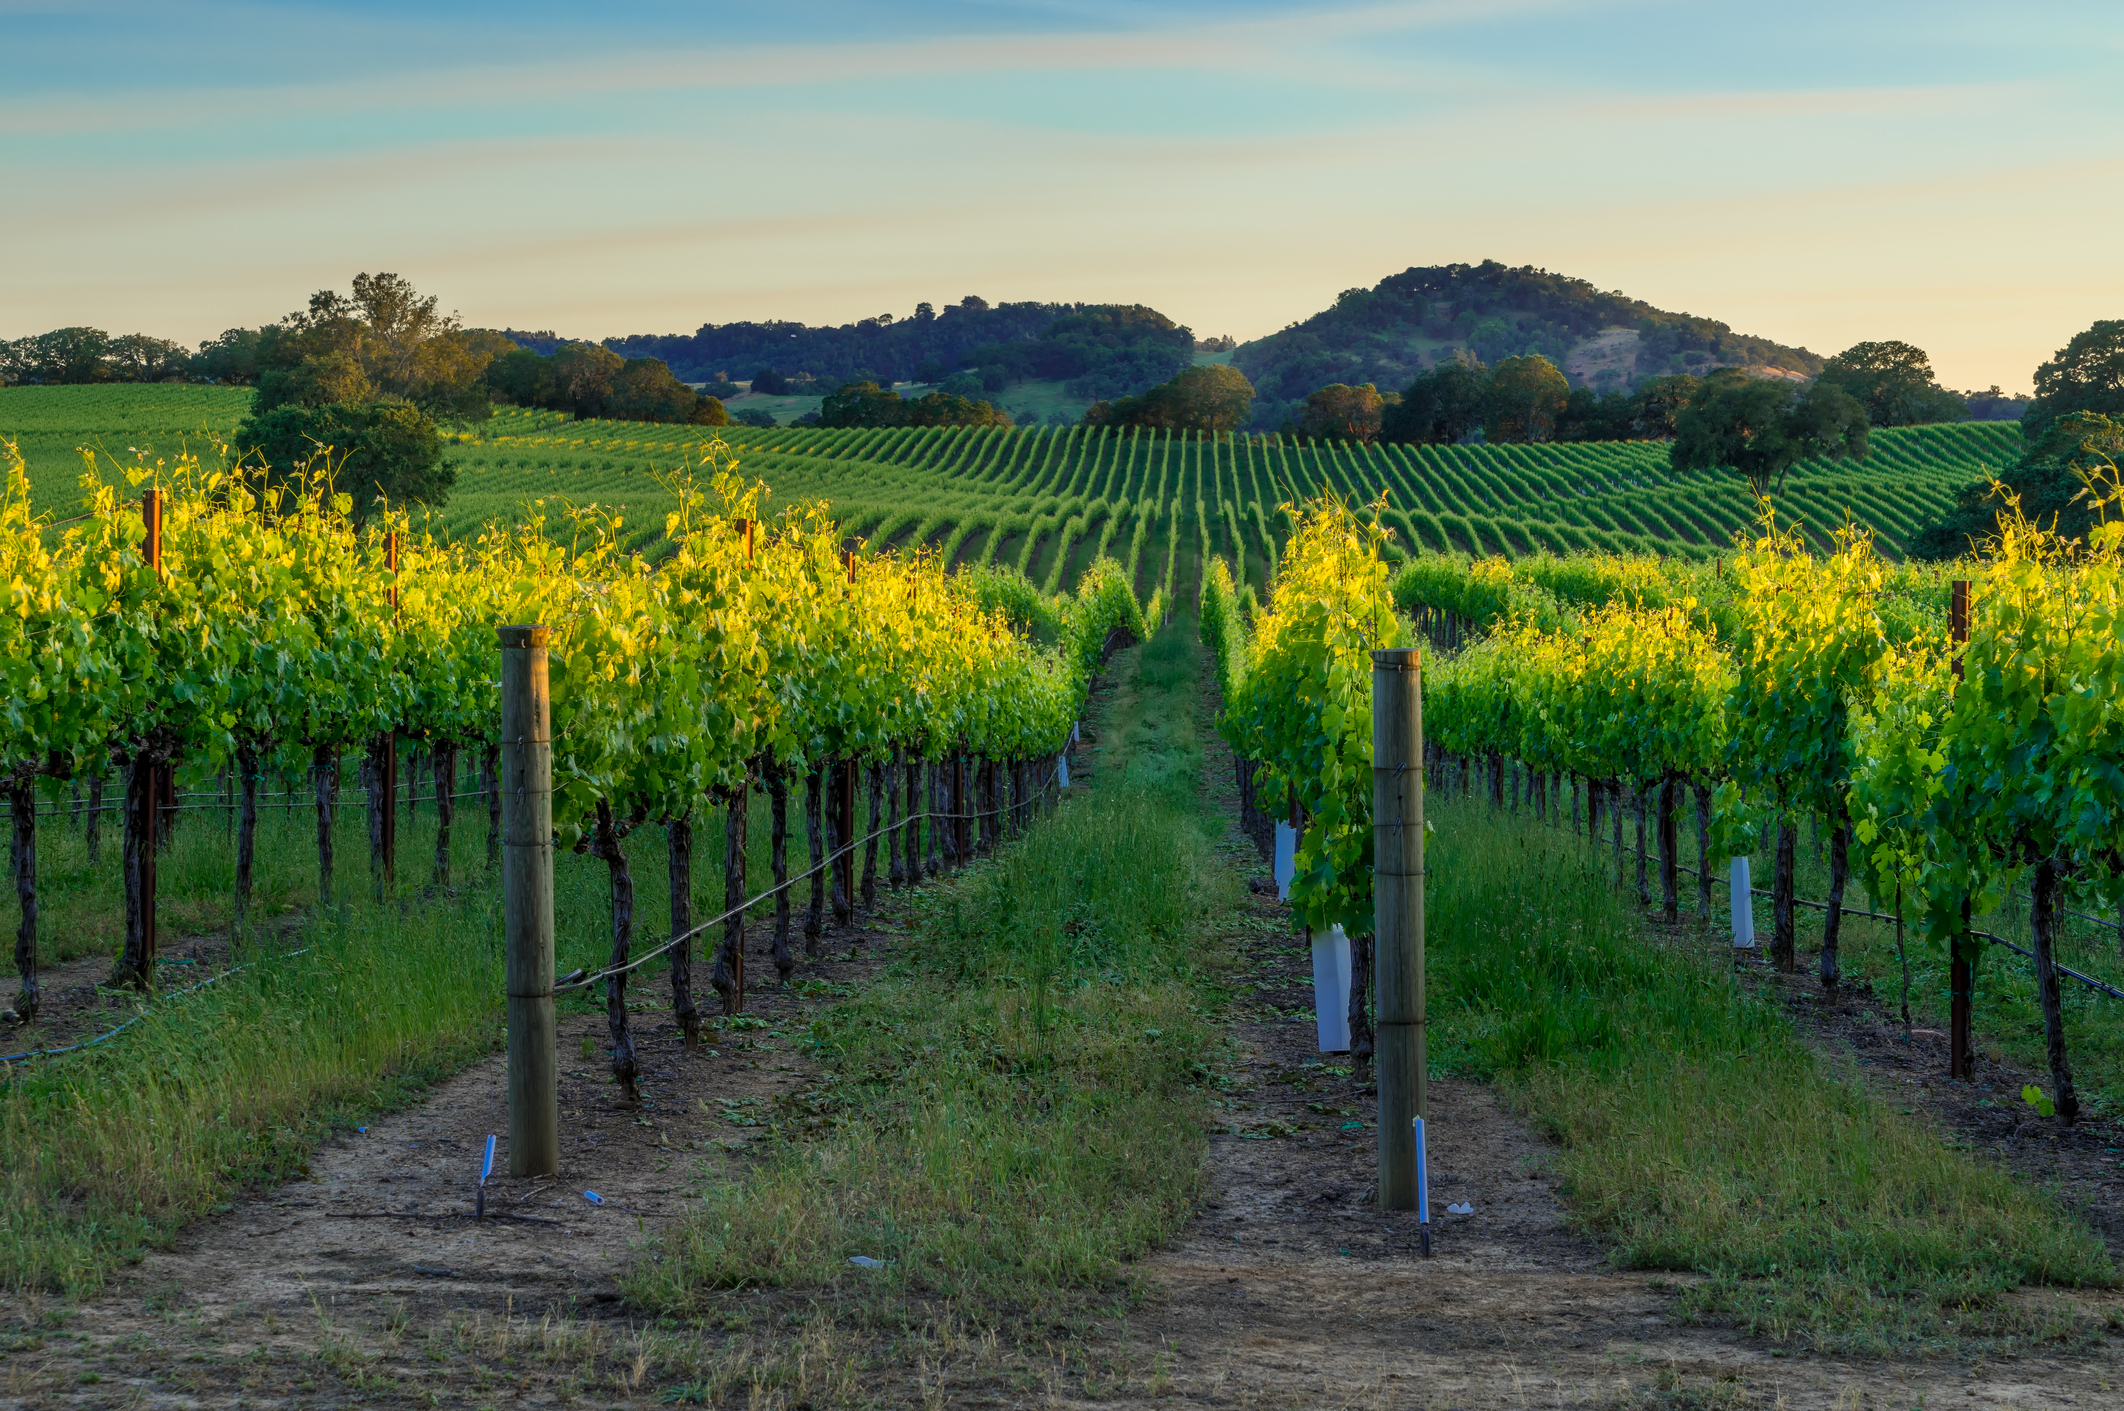 Sunset in the vineyards of Sonoma County, California